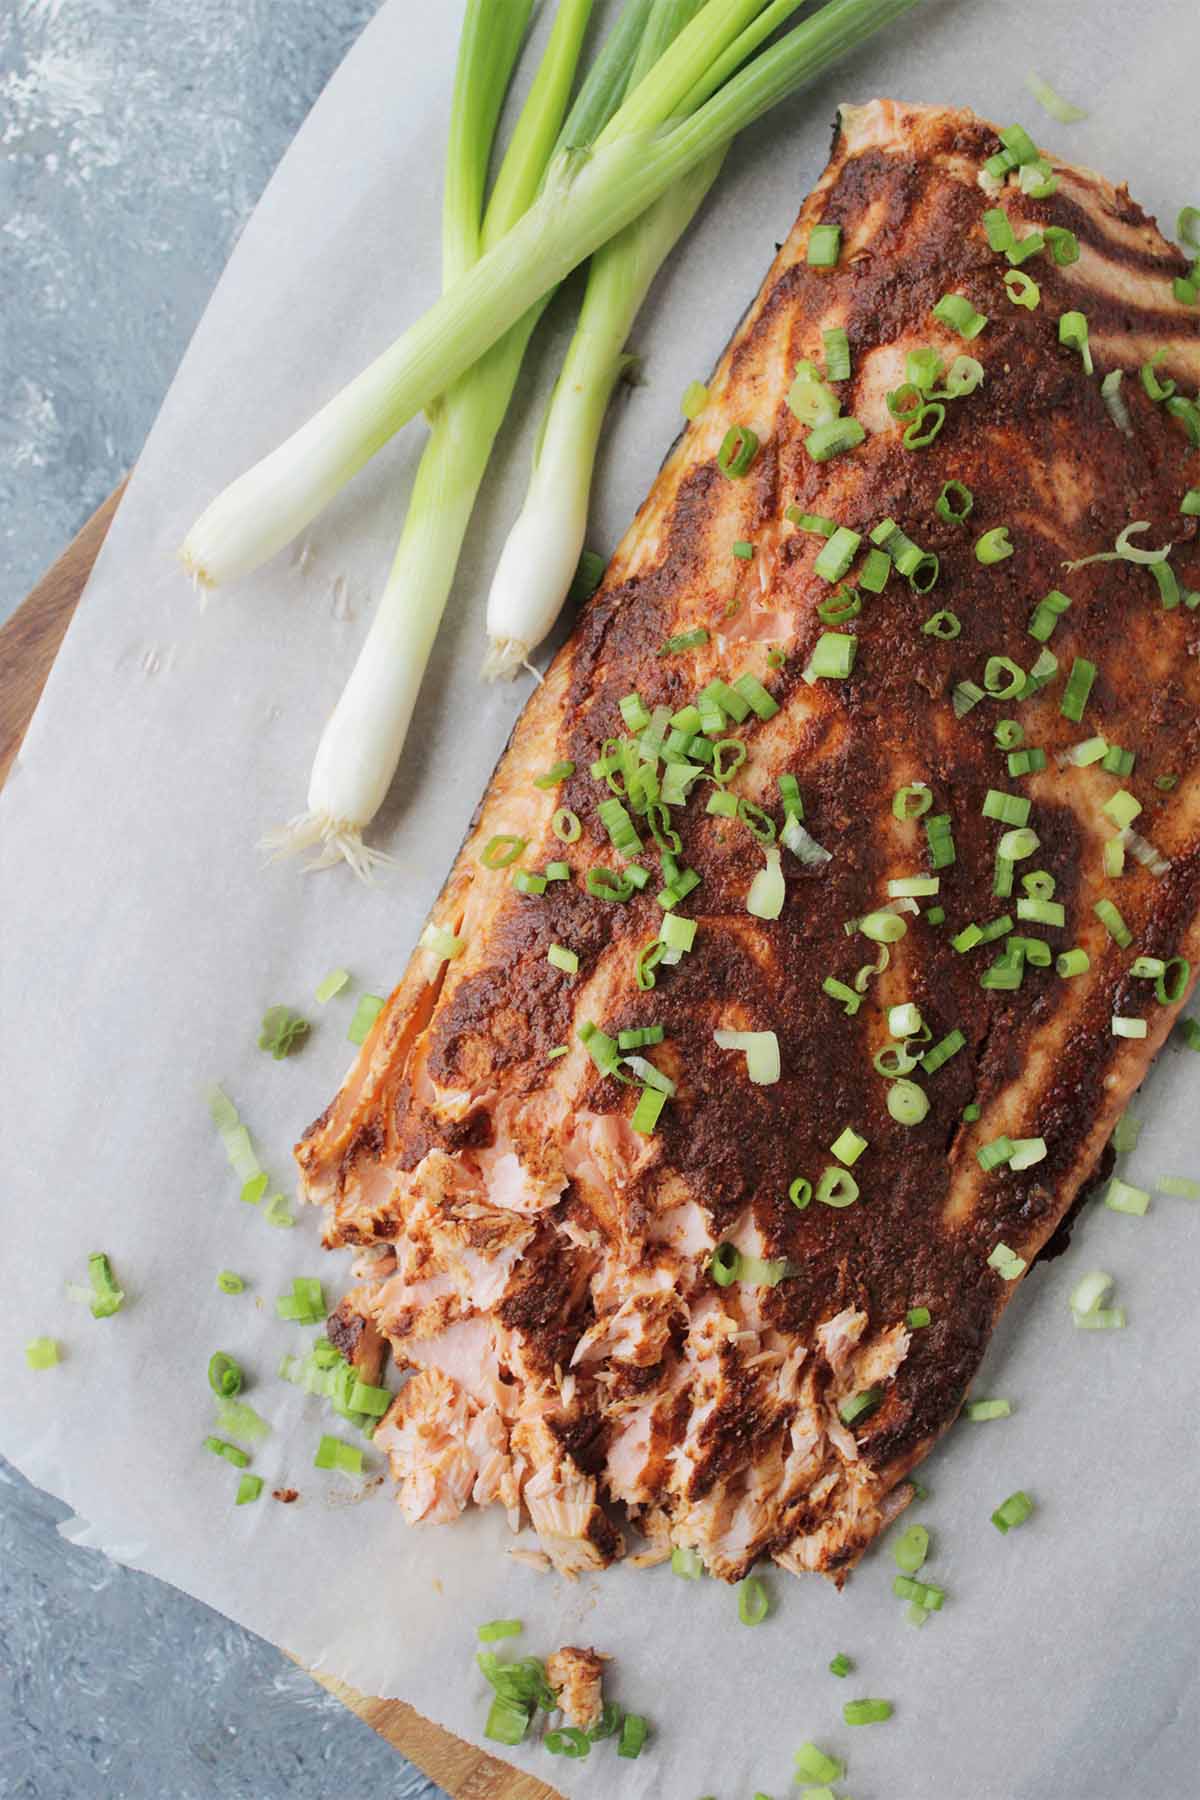 adobo seasoning on salmon fillet garnished with green onions.